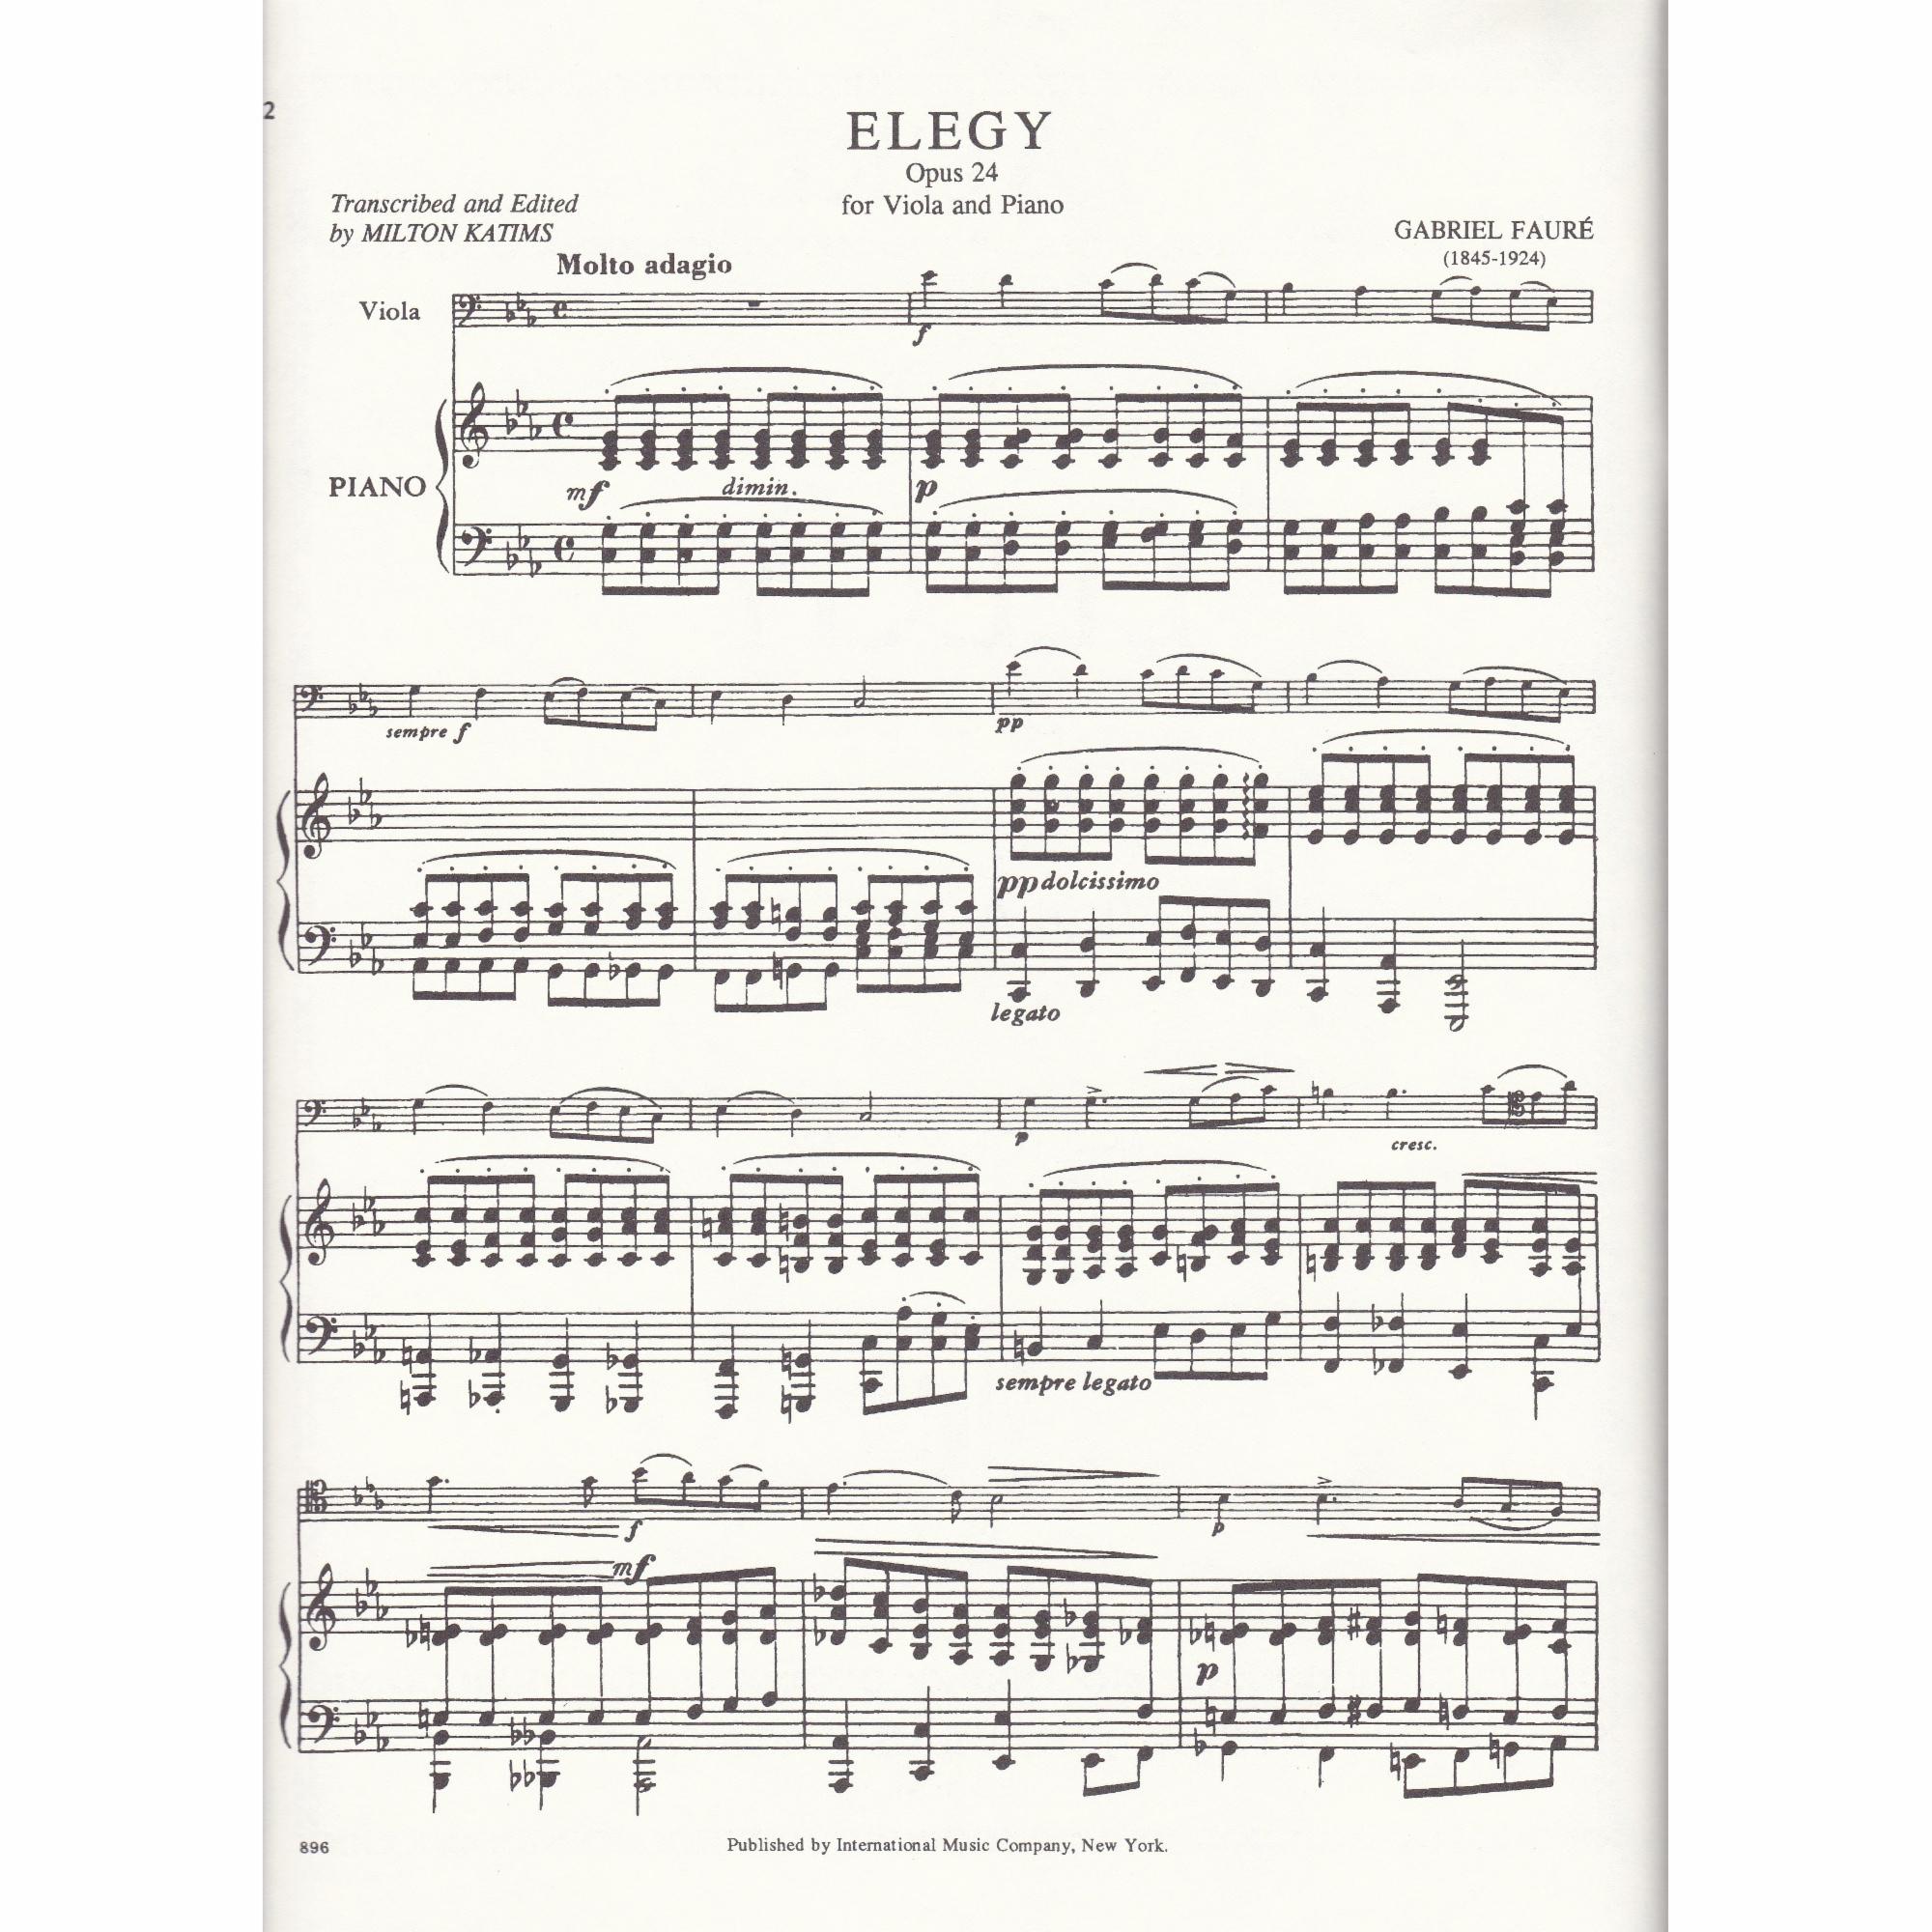 Elegy for Viola and Piano, Op. 24